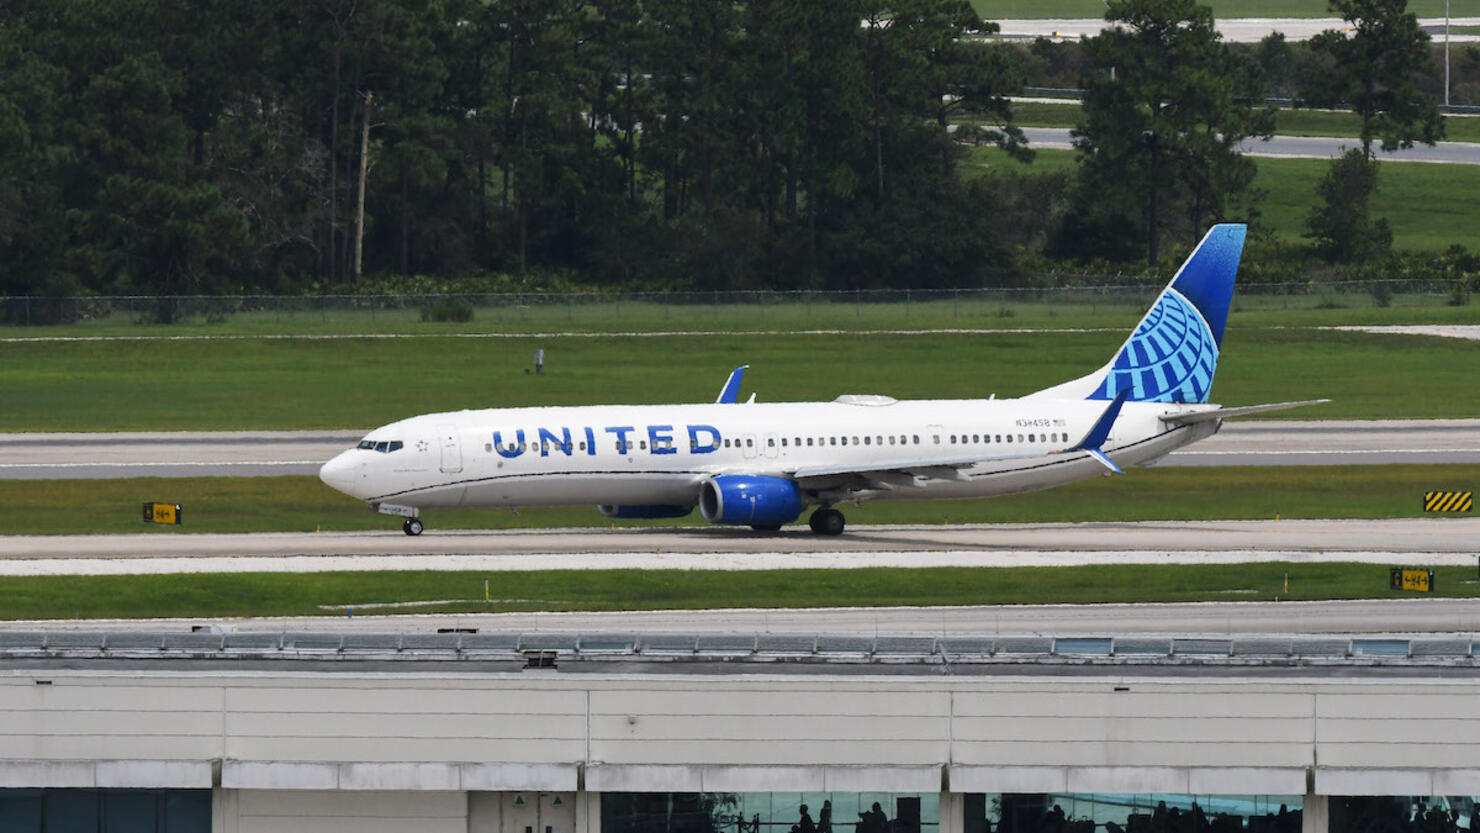 A United Airlines plane is seen taxiing on the tarmac at